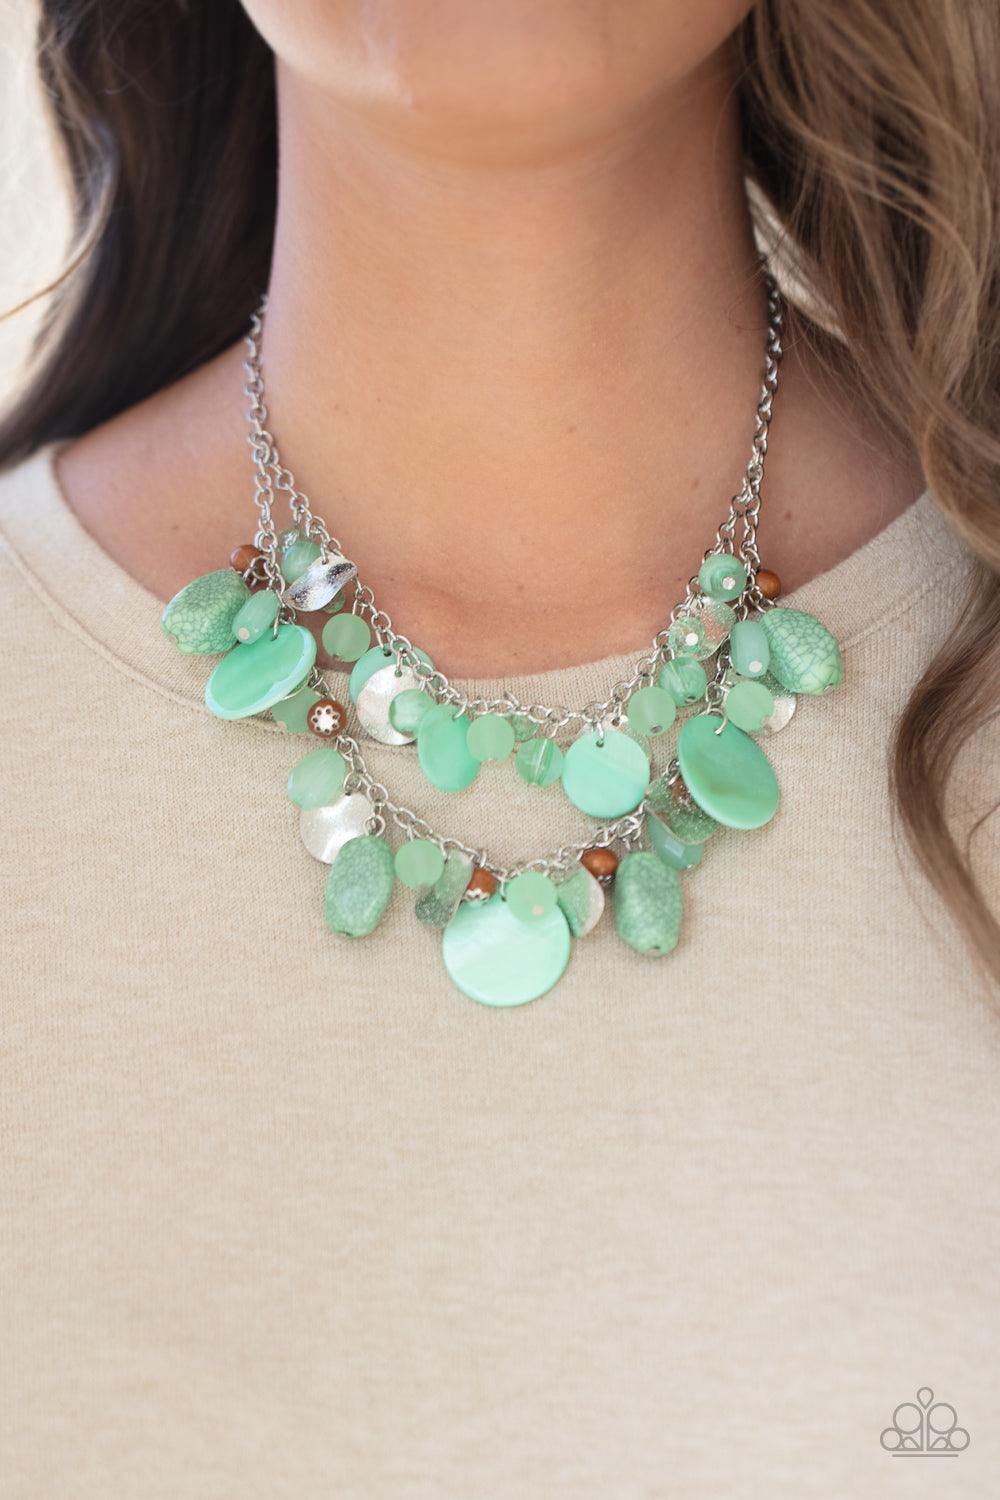 Paparazzi Accessories Spring Goddess - Green Infused with wooden beads and silver discs, an earthy collection of glassy, opaque, and shell-like Green Ash beads swing from two silver chains. The refreshing display effortlessly layers below the collar, crea